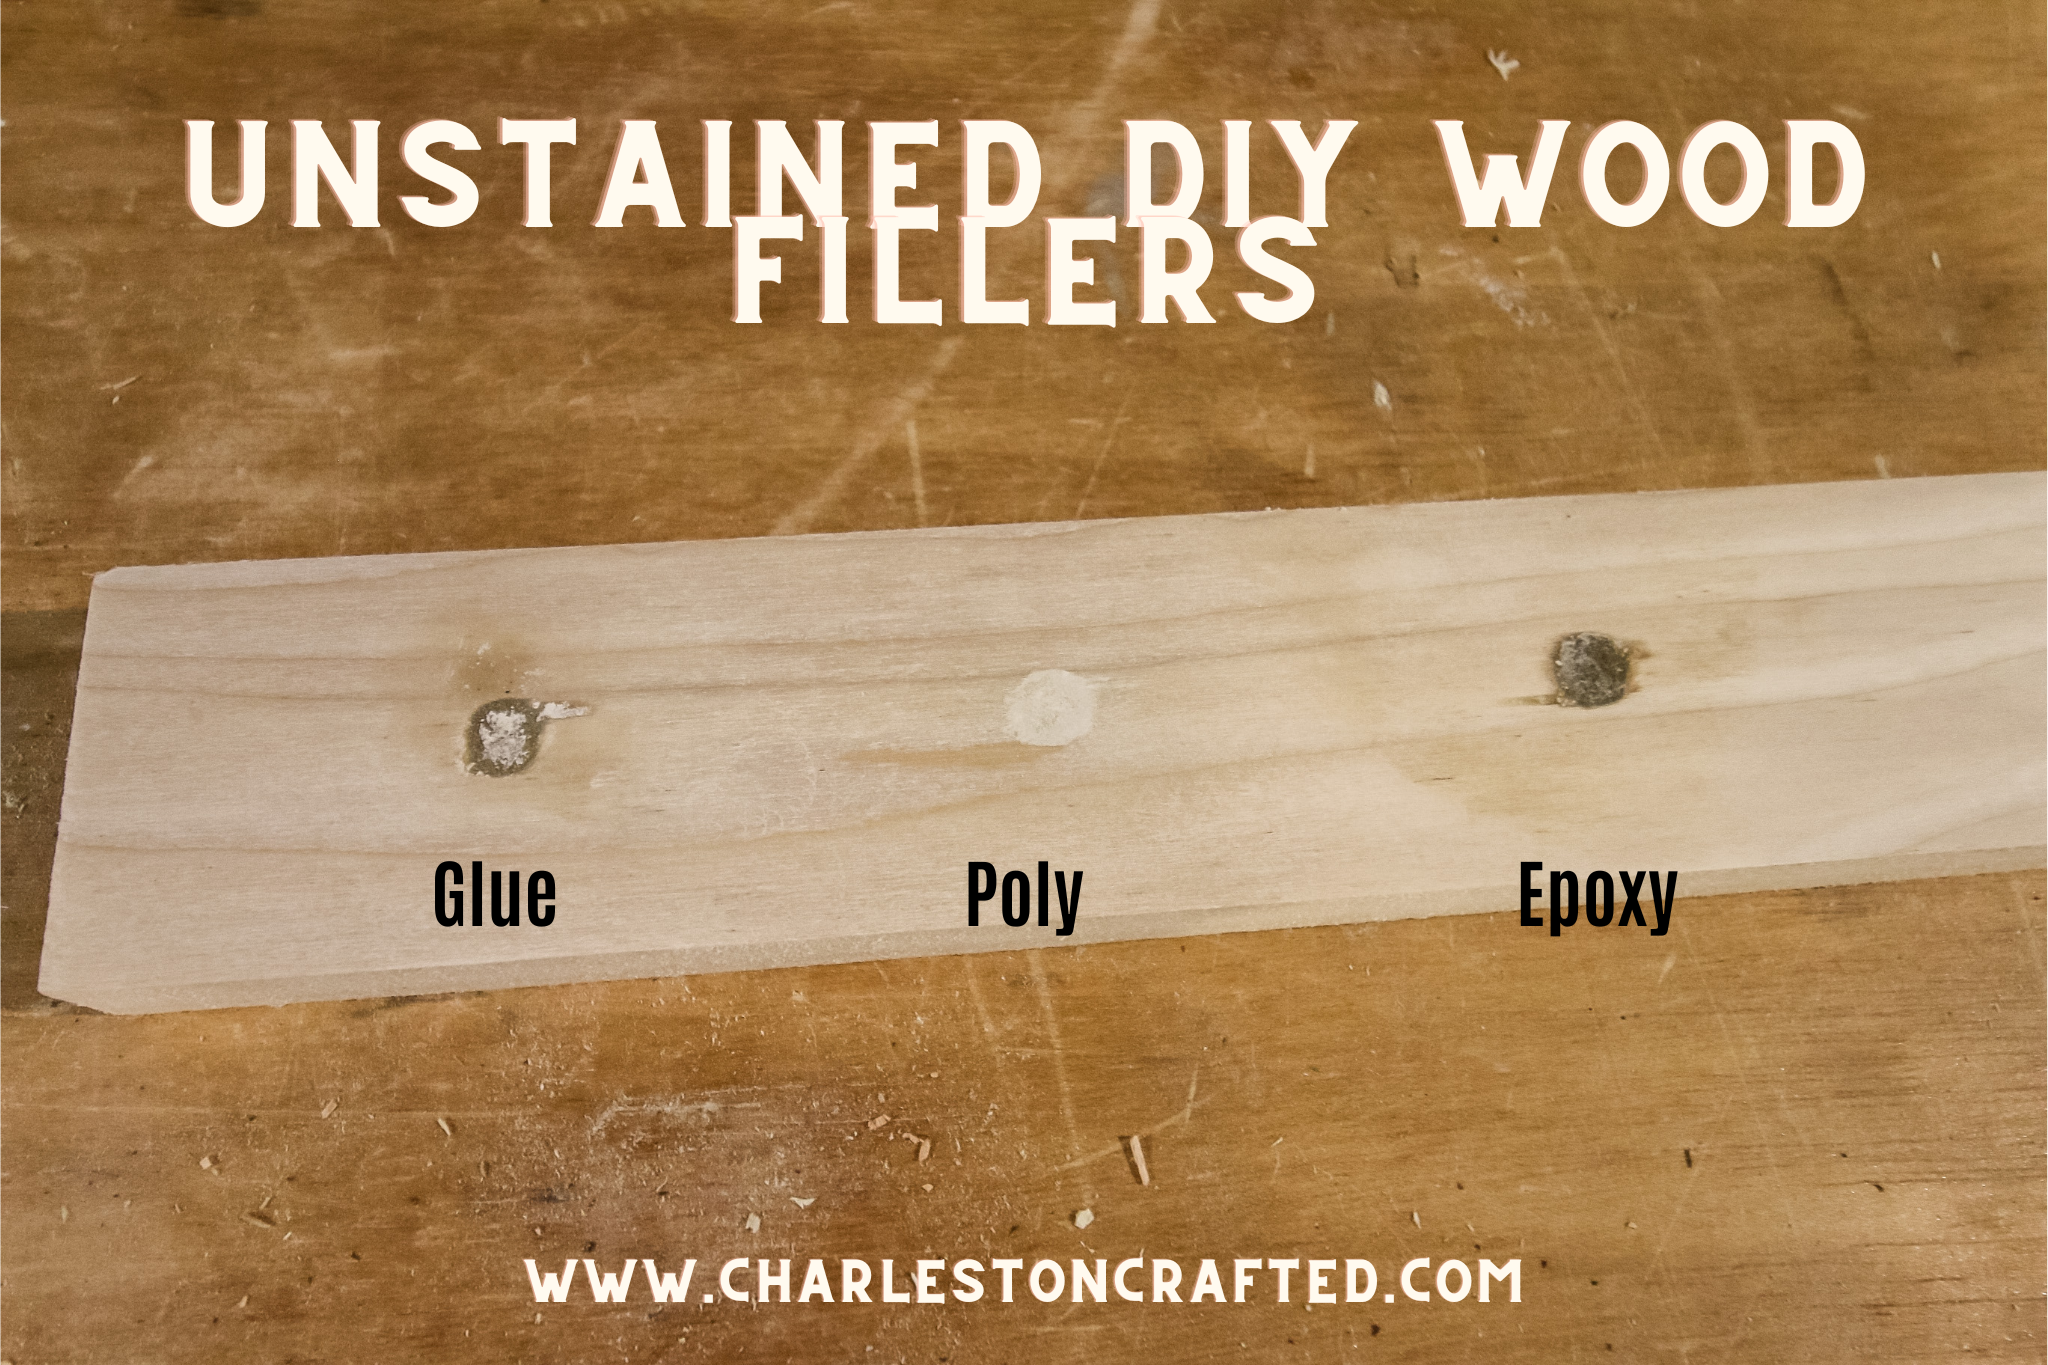 What Is And How To Use The Epoxy Wood Filler